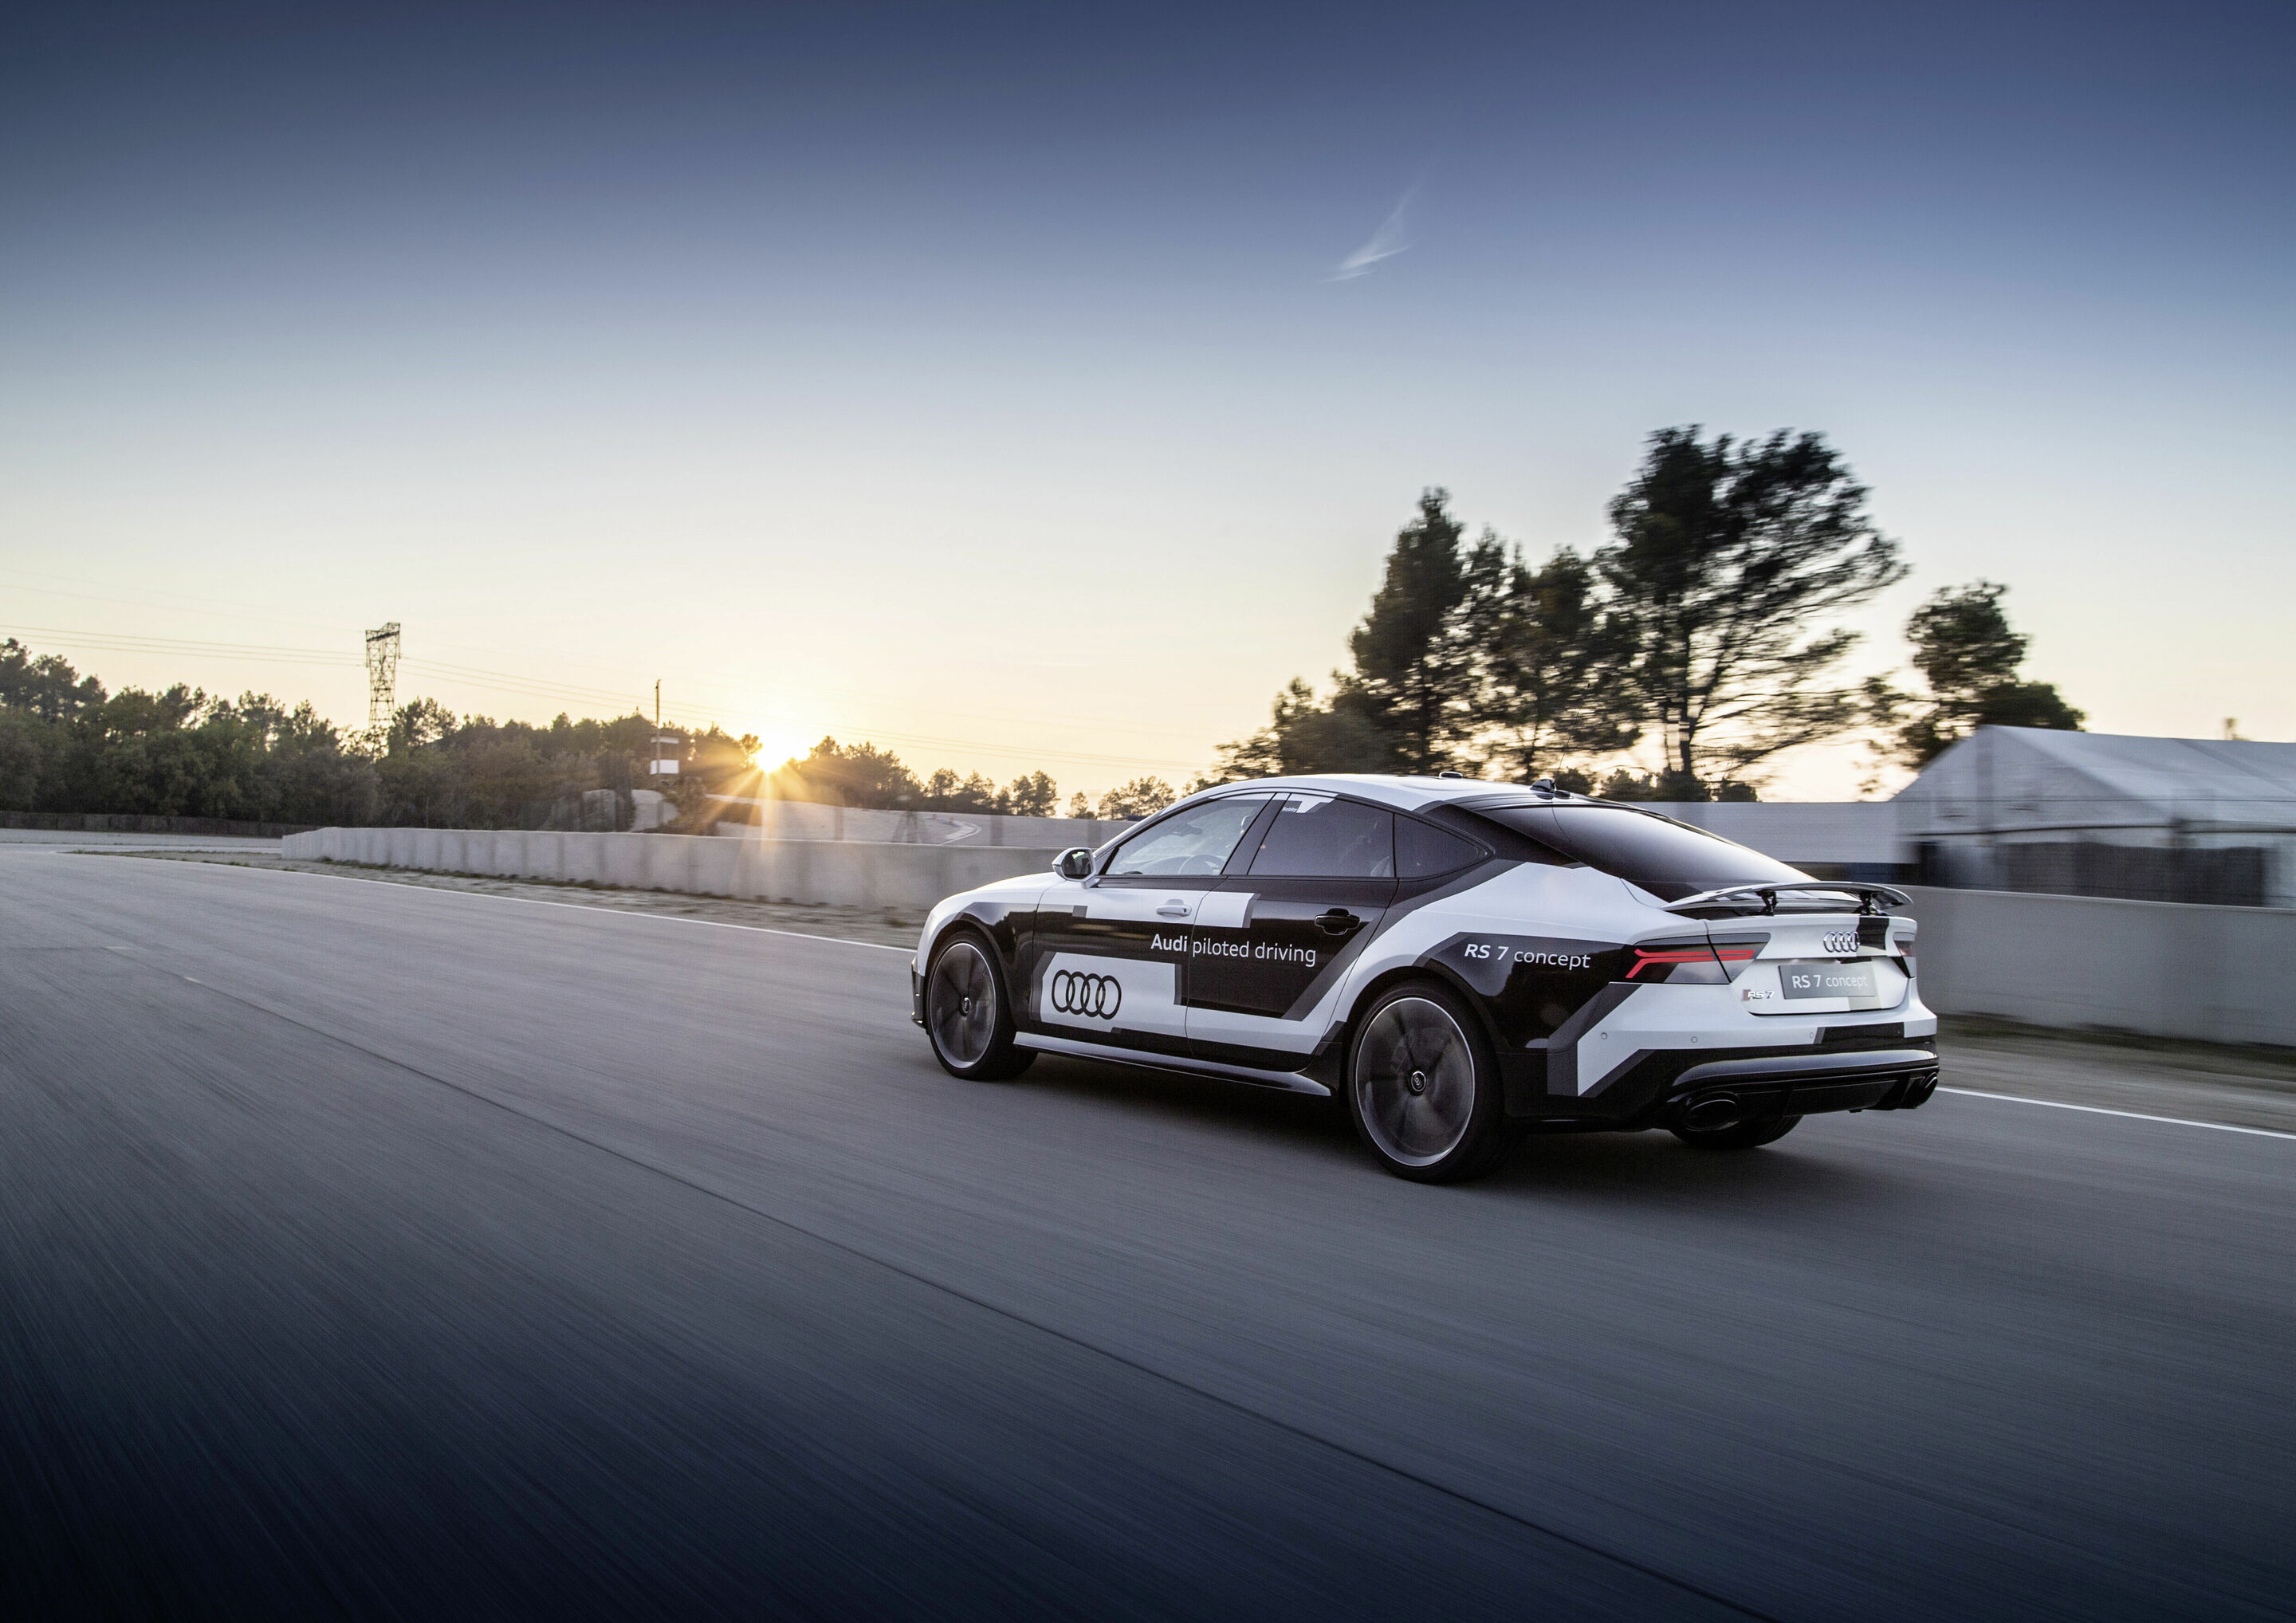 Audi RS 7 piloted driving concept drives autonomously in record time on race track in Spain